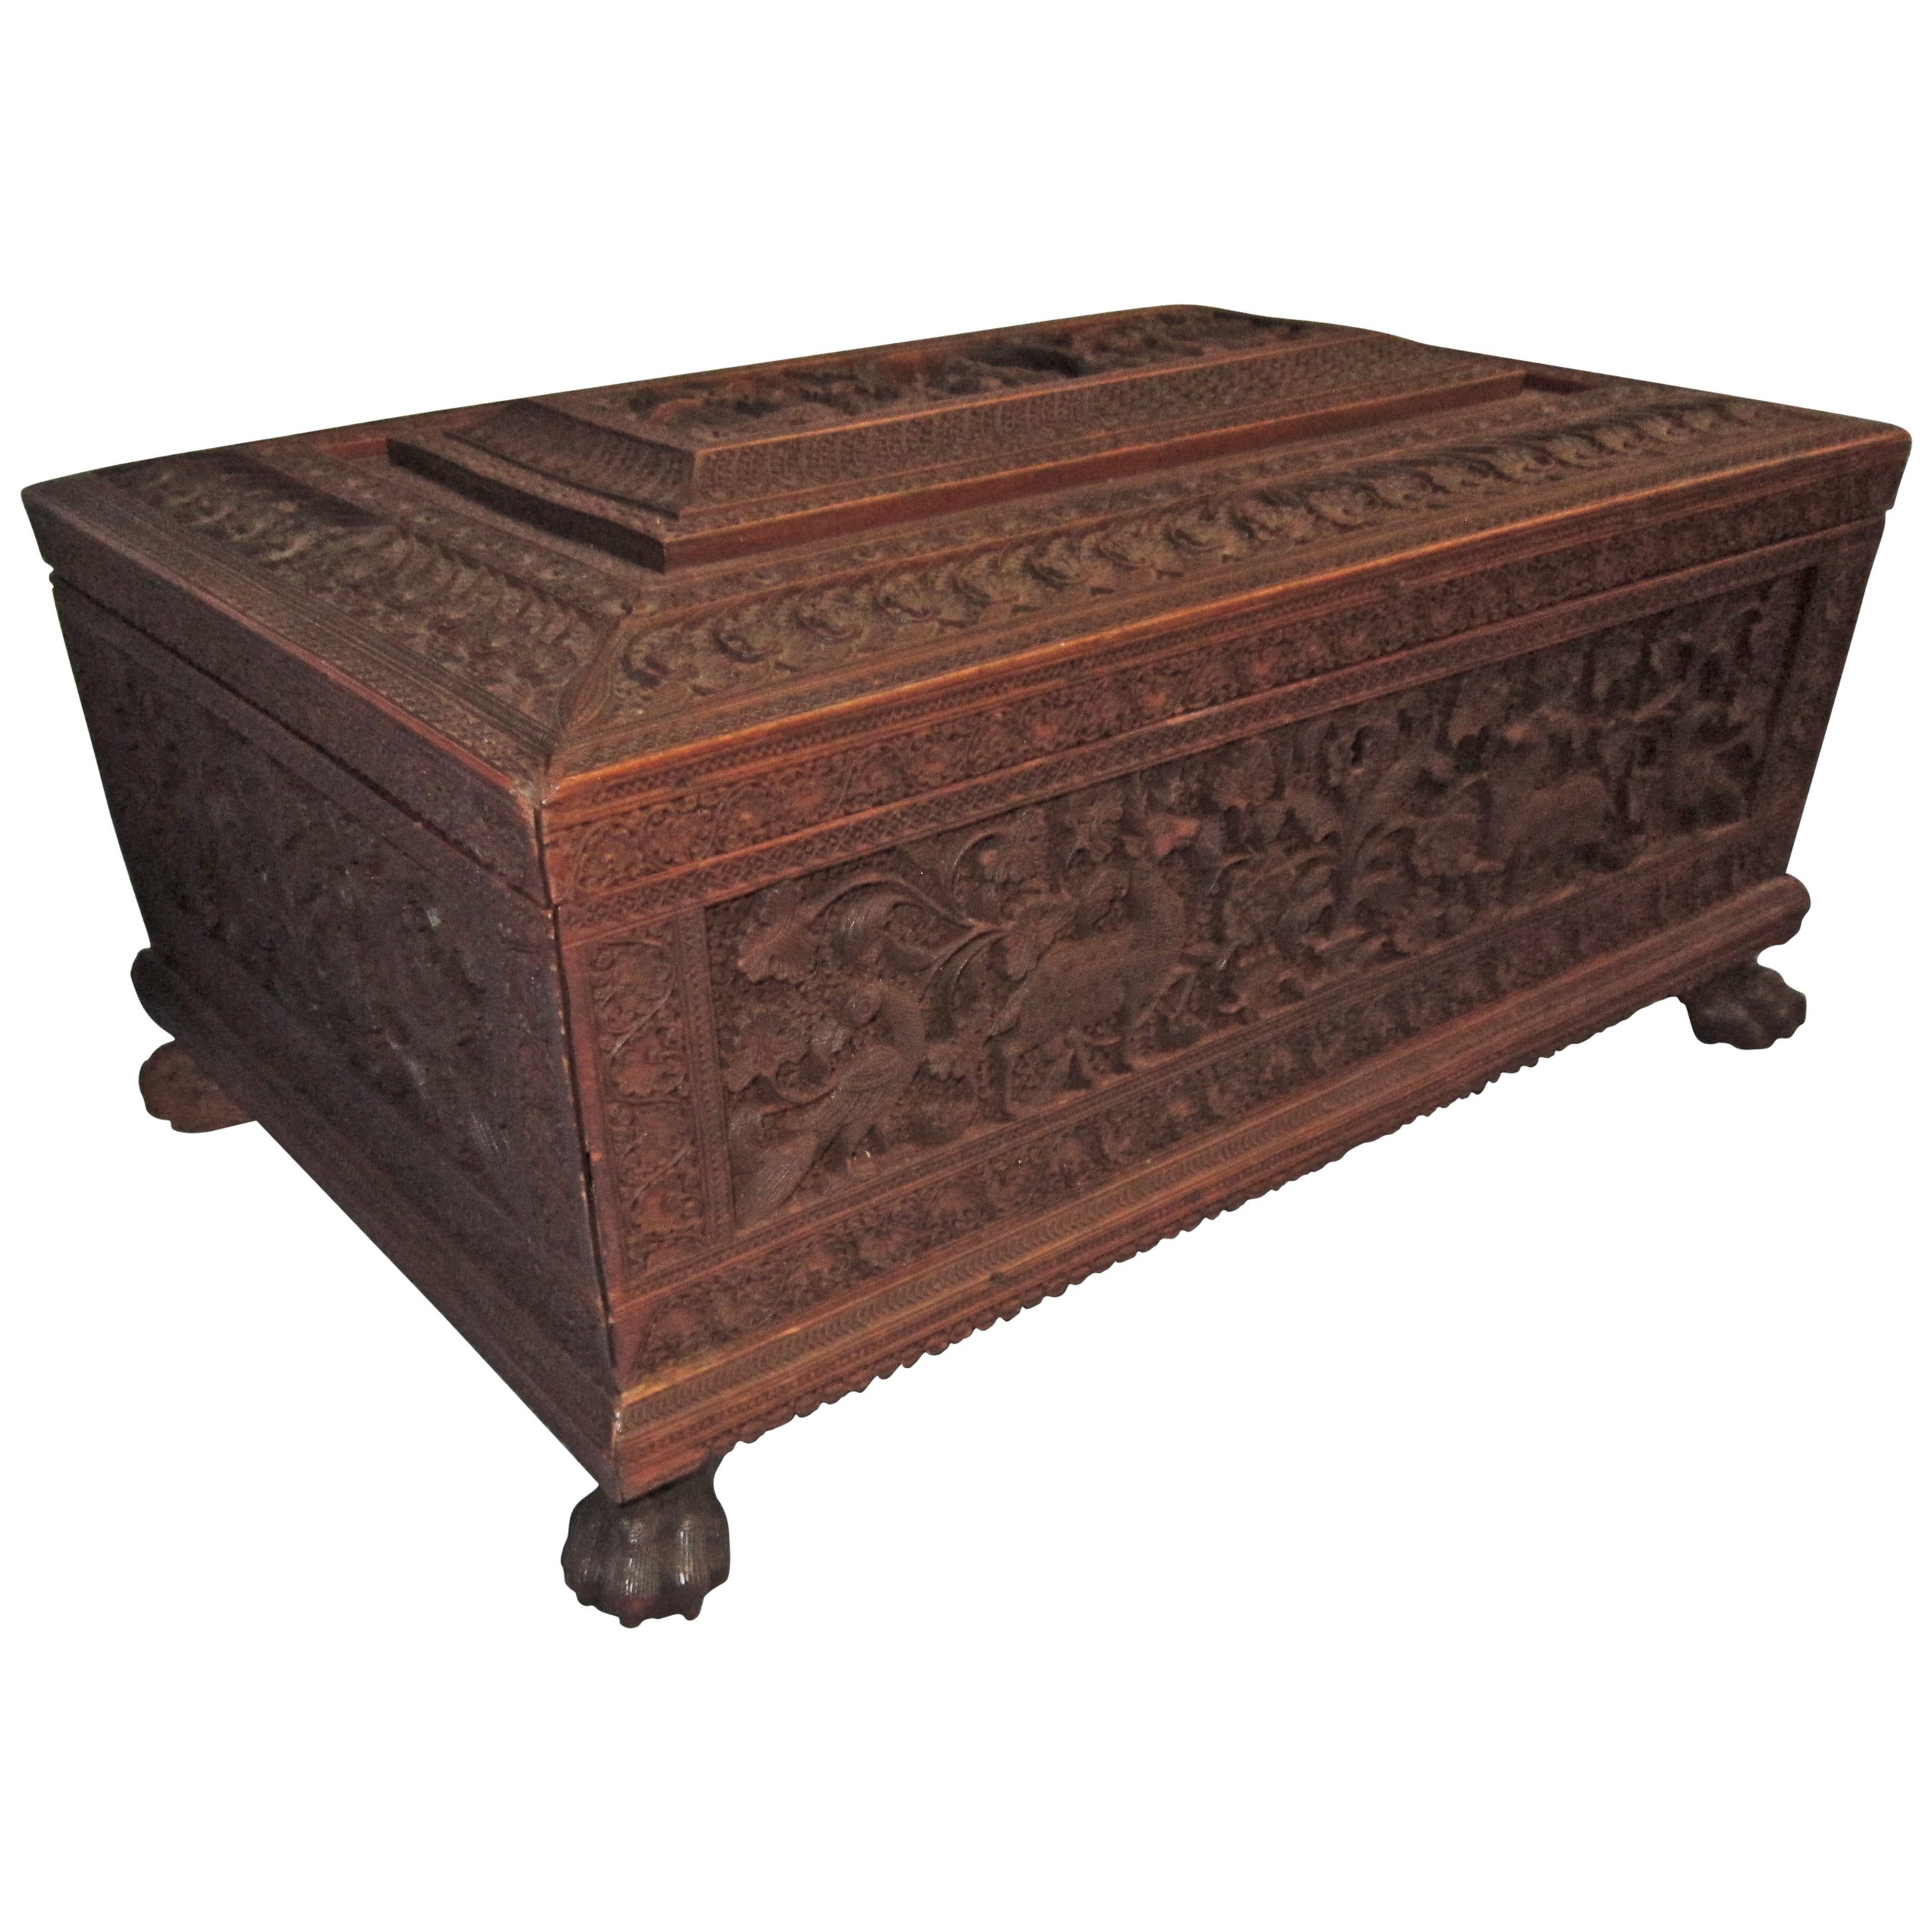 19th Century Anglo-Indian Carved Sandalwood Sewing Box For Sale